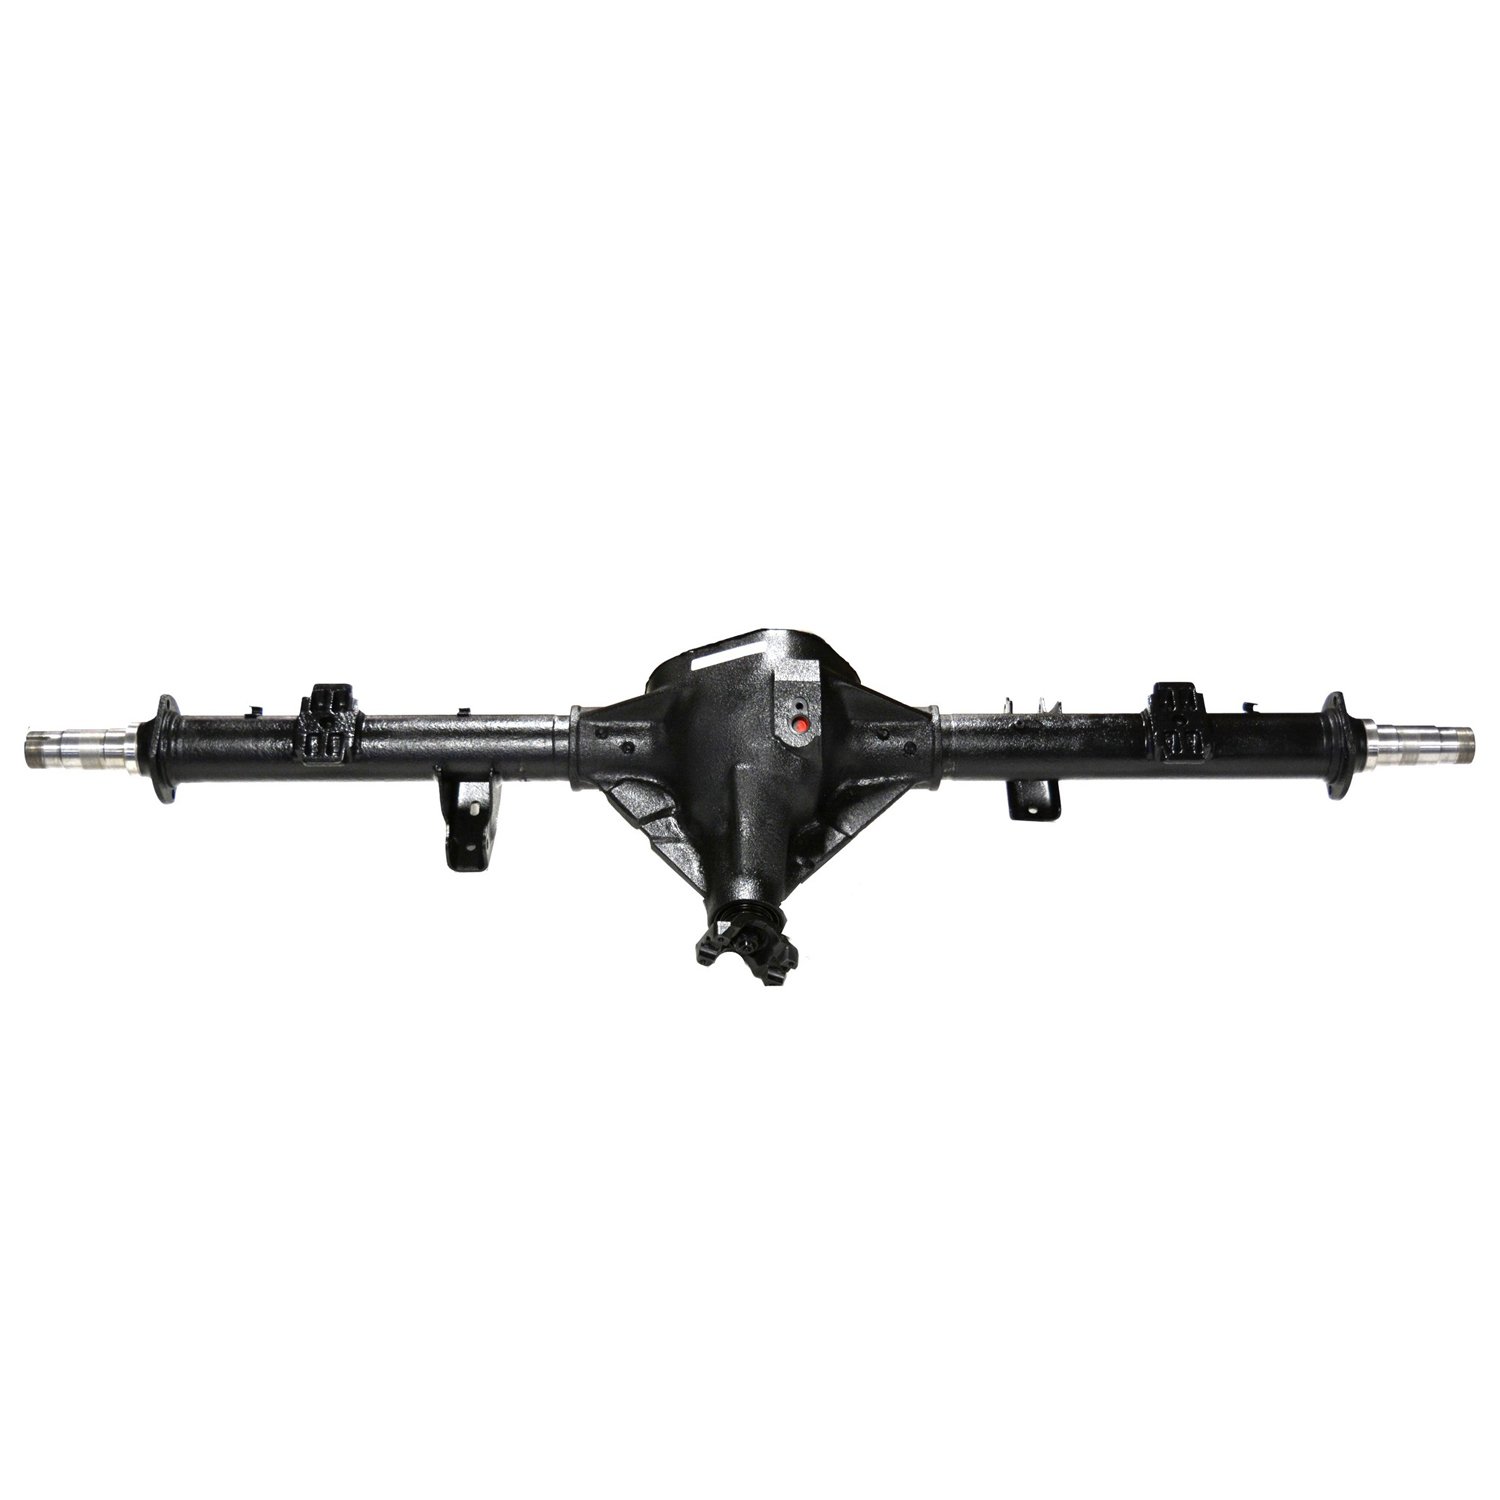 Remanufactured Complete Axle Assembly for Dana 60 98-03 Van 3500 4.09, 8 Lug, Posi LSD